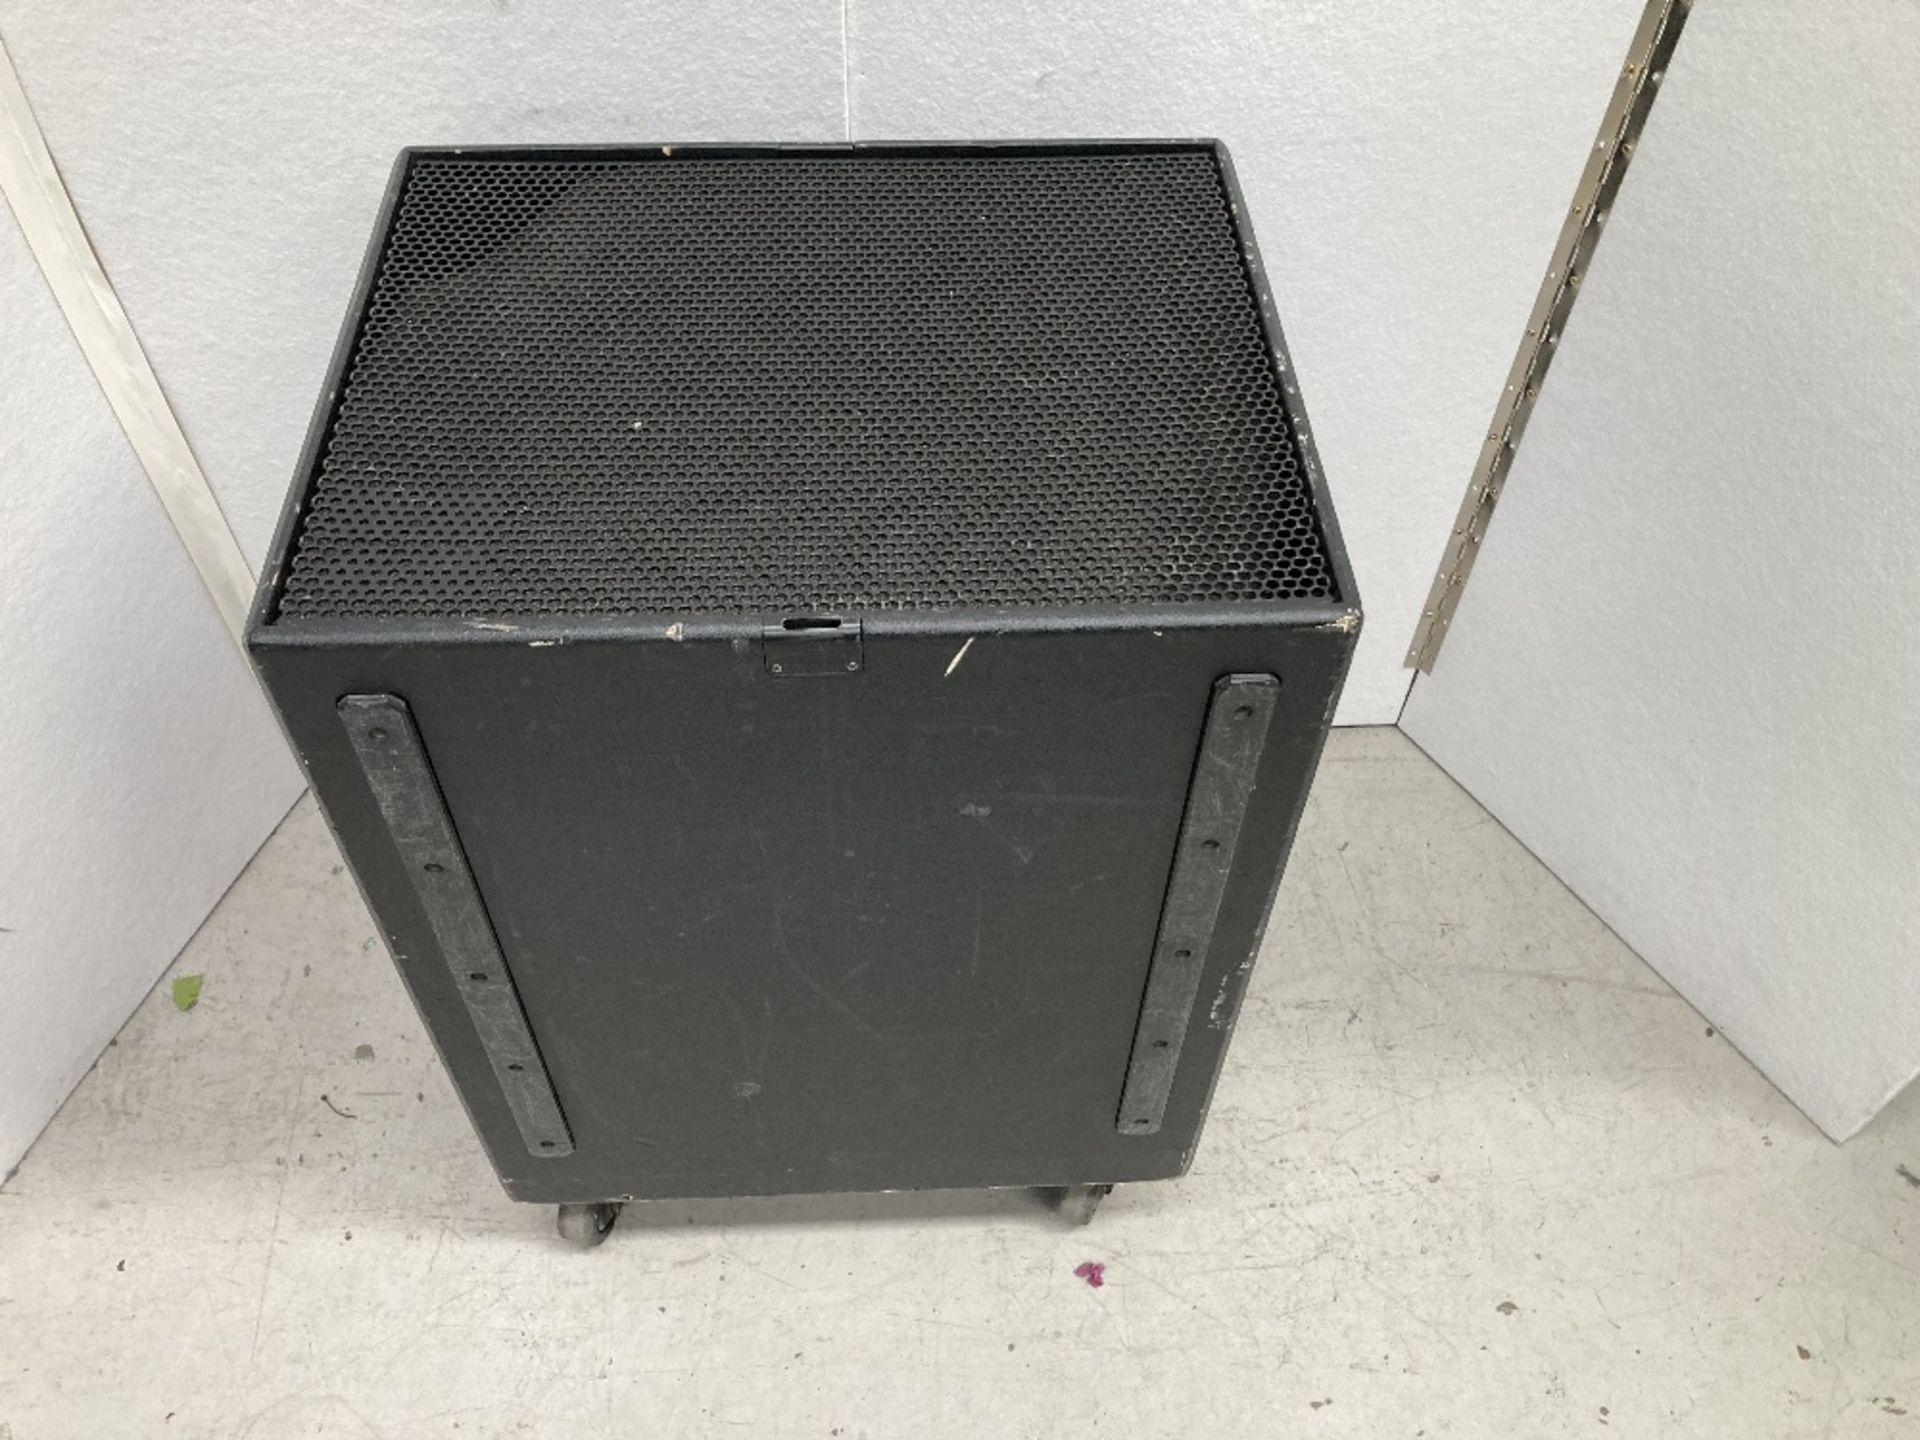 d&b B4 Subwoofer Mounted on Wheels - Image 2 of 6